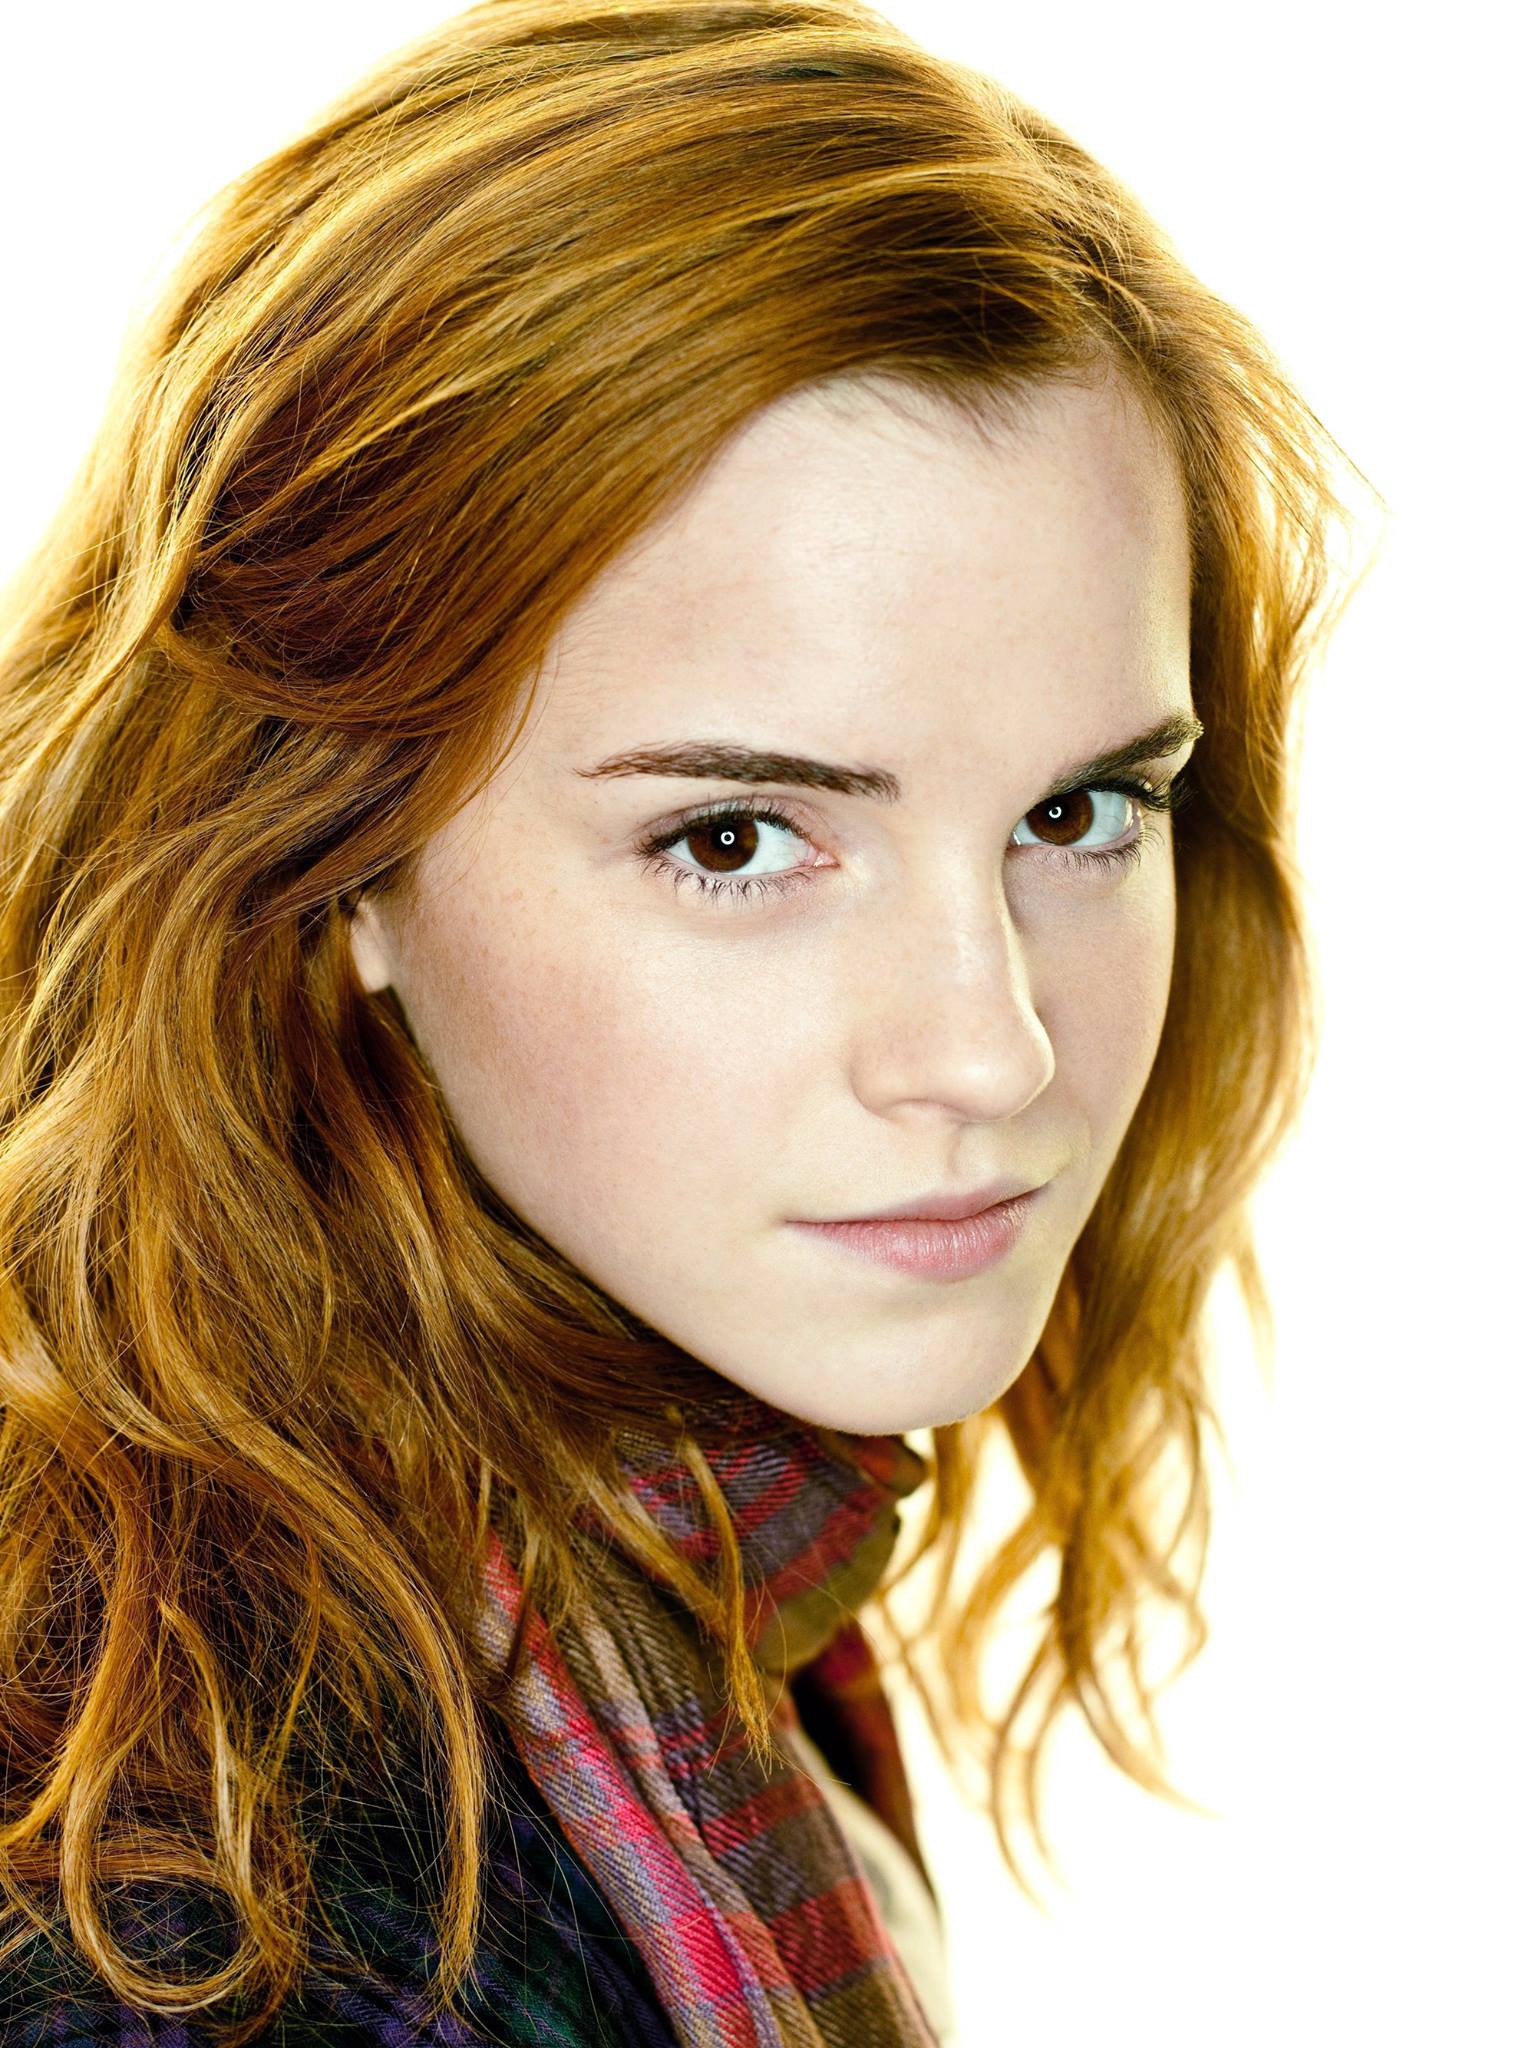 https://static.wikia.nocookie.net/harrypotter/images/3/34/Hermione_Granger.jpg/revision/latest?cb=20210522145306